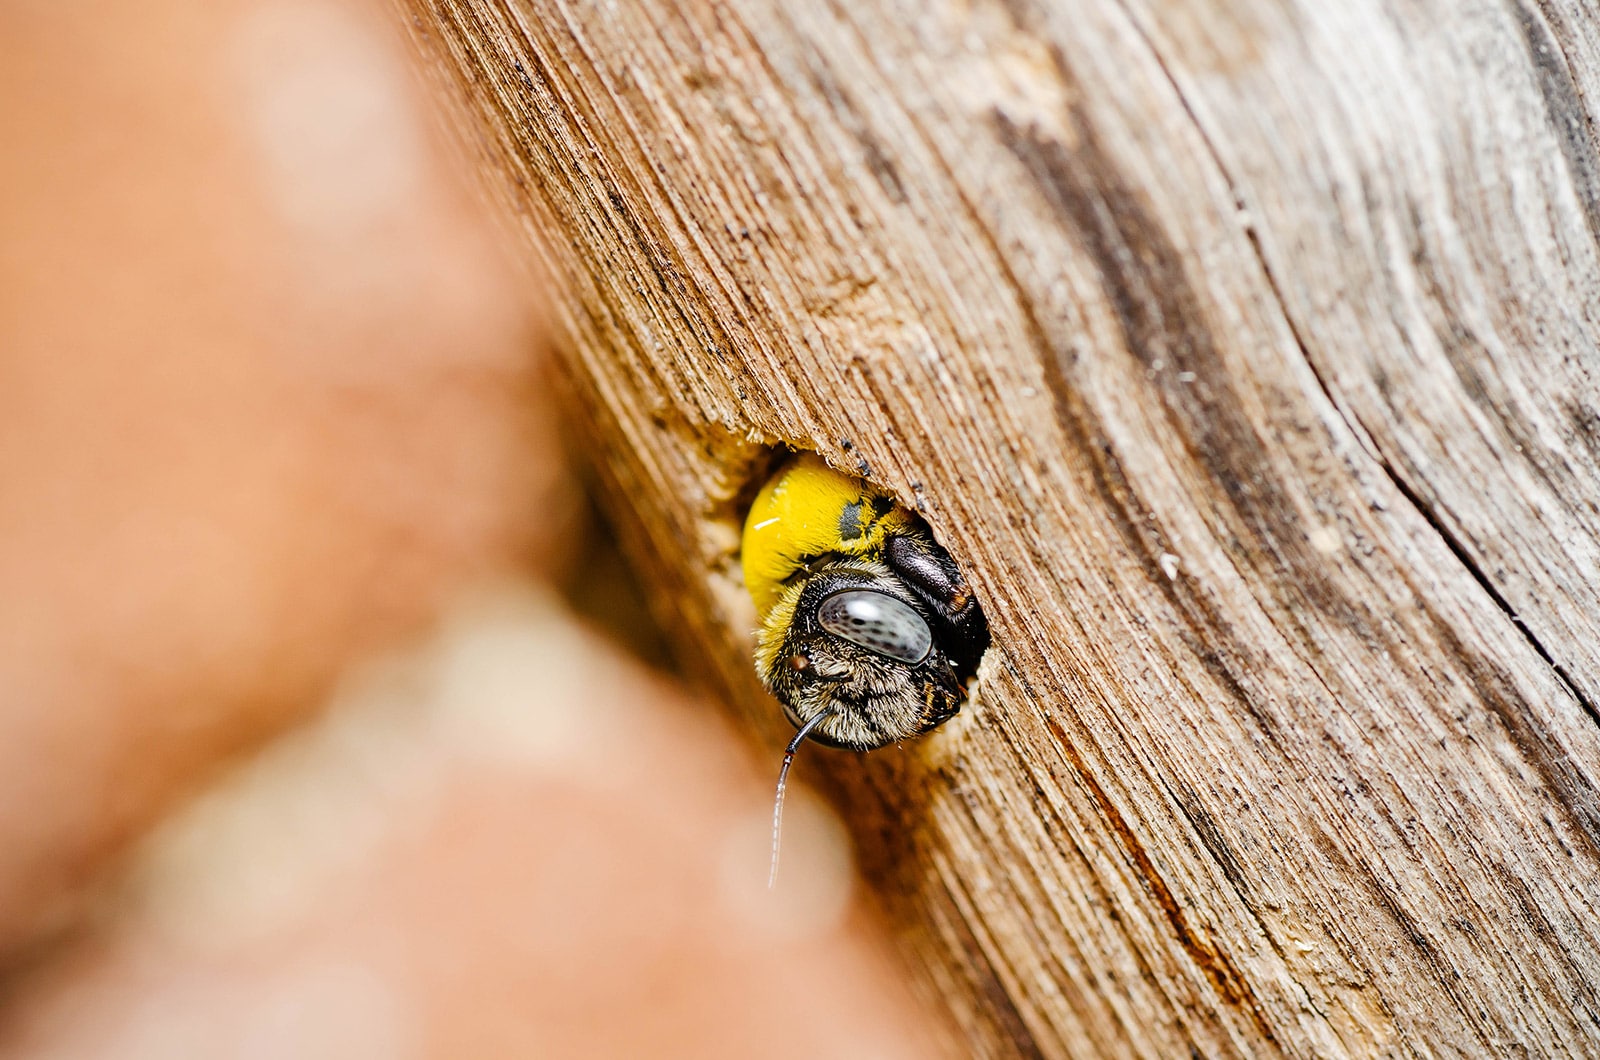 How to stop carpenter bees: 6 simple tricks that work (without toxins)